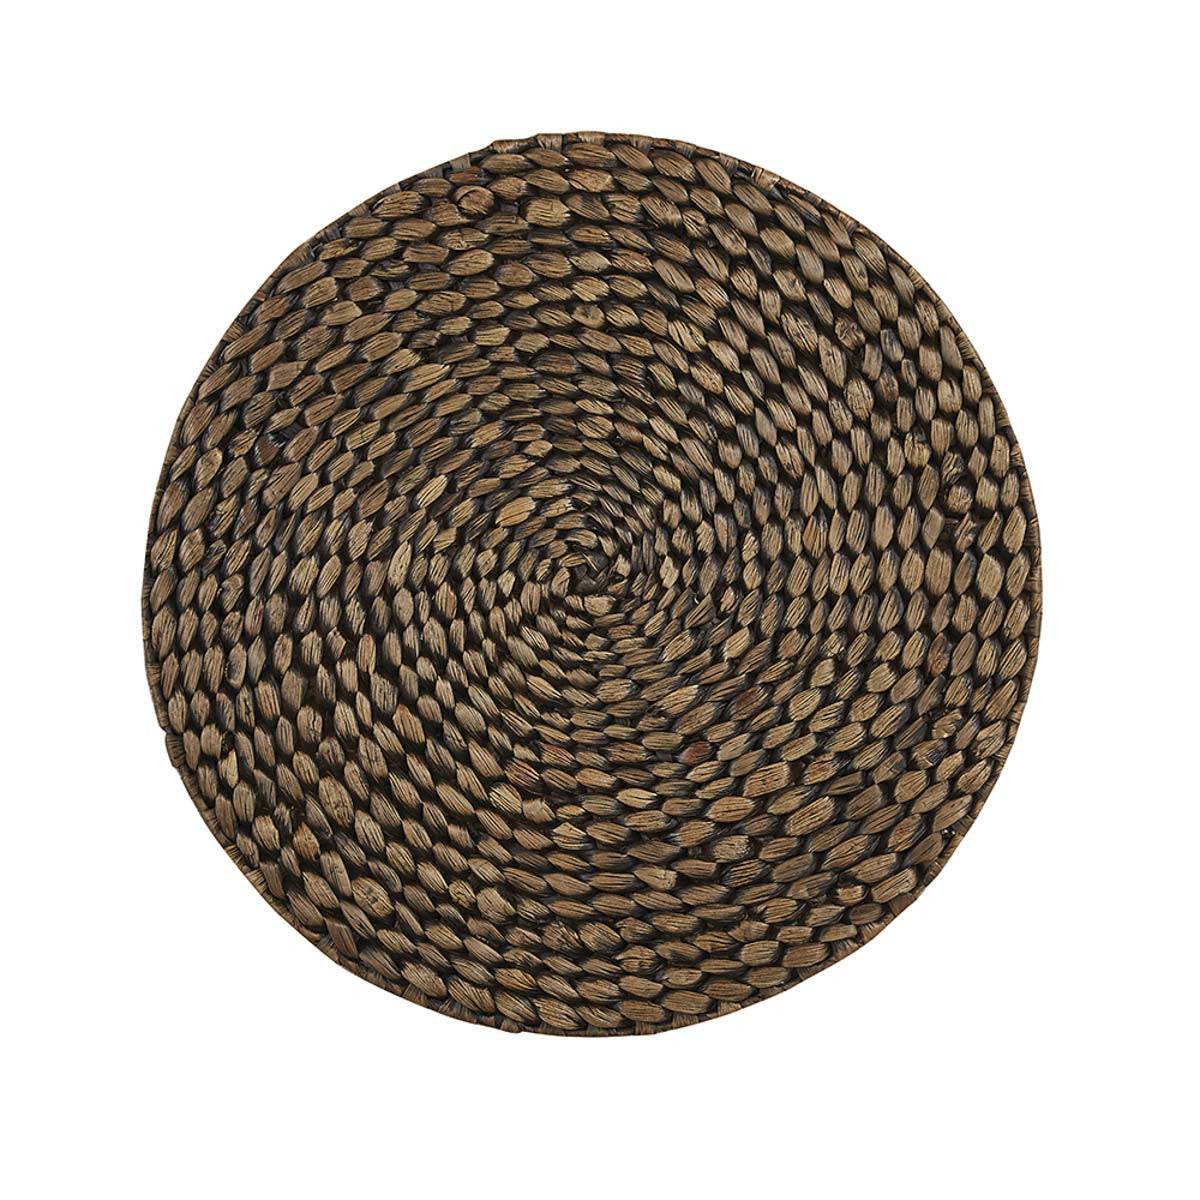 Hyacinth Round Braided Placemat - Brown Set Of 6 Park Designs